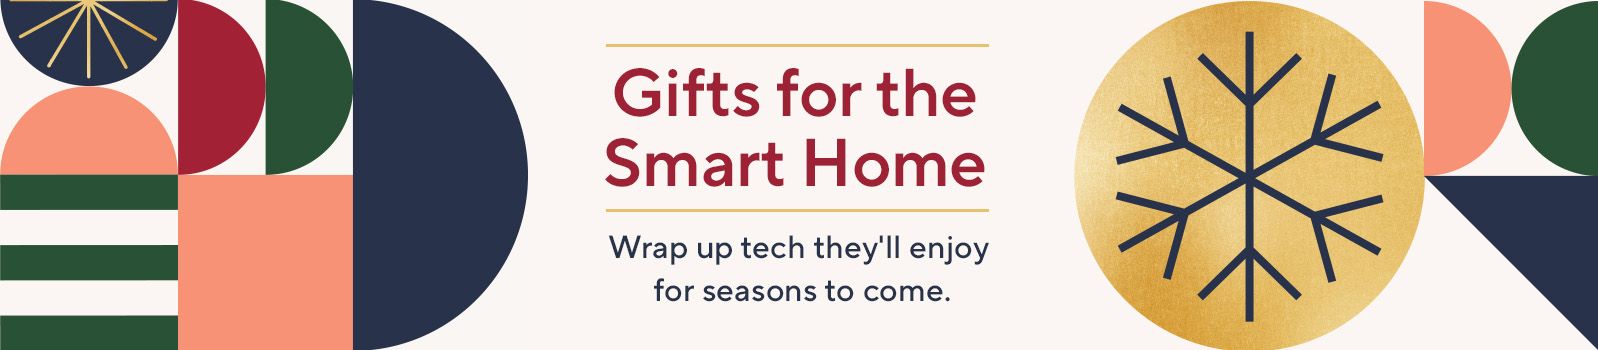 Gifts for the Smart Home. Wrap up tech they'll enjoy for seasons to come.